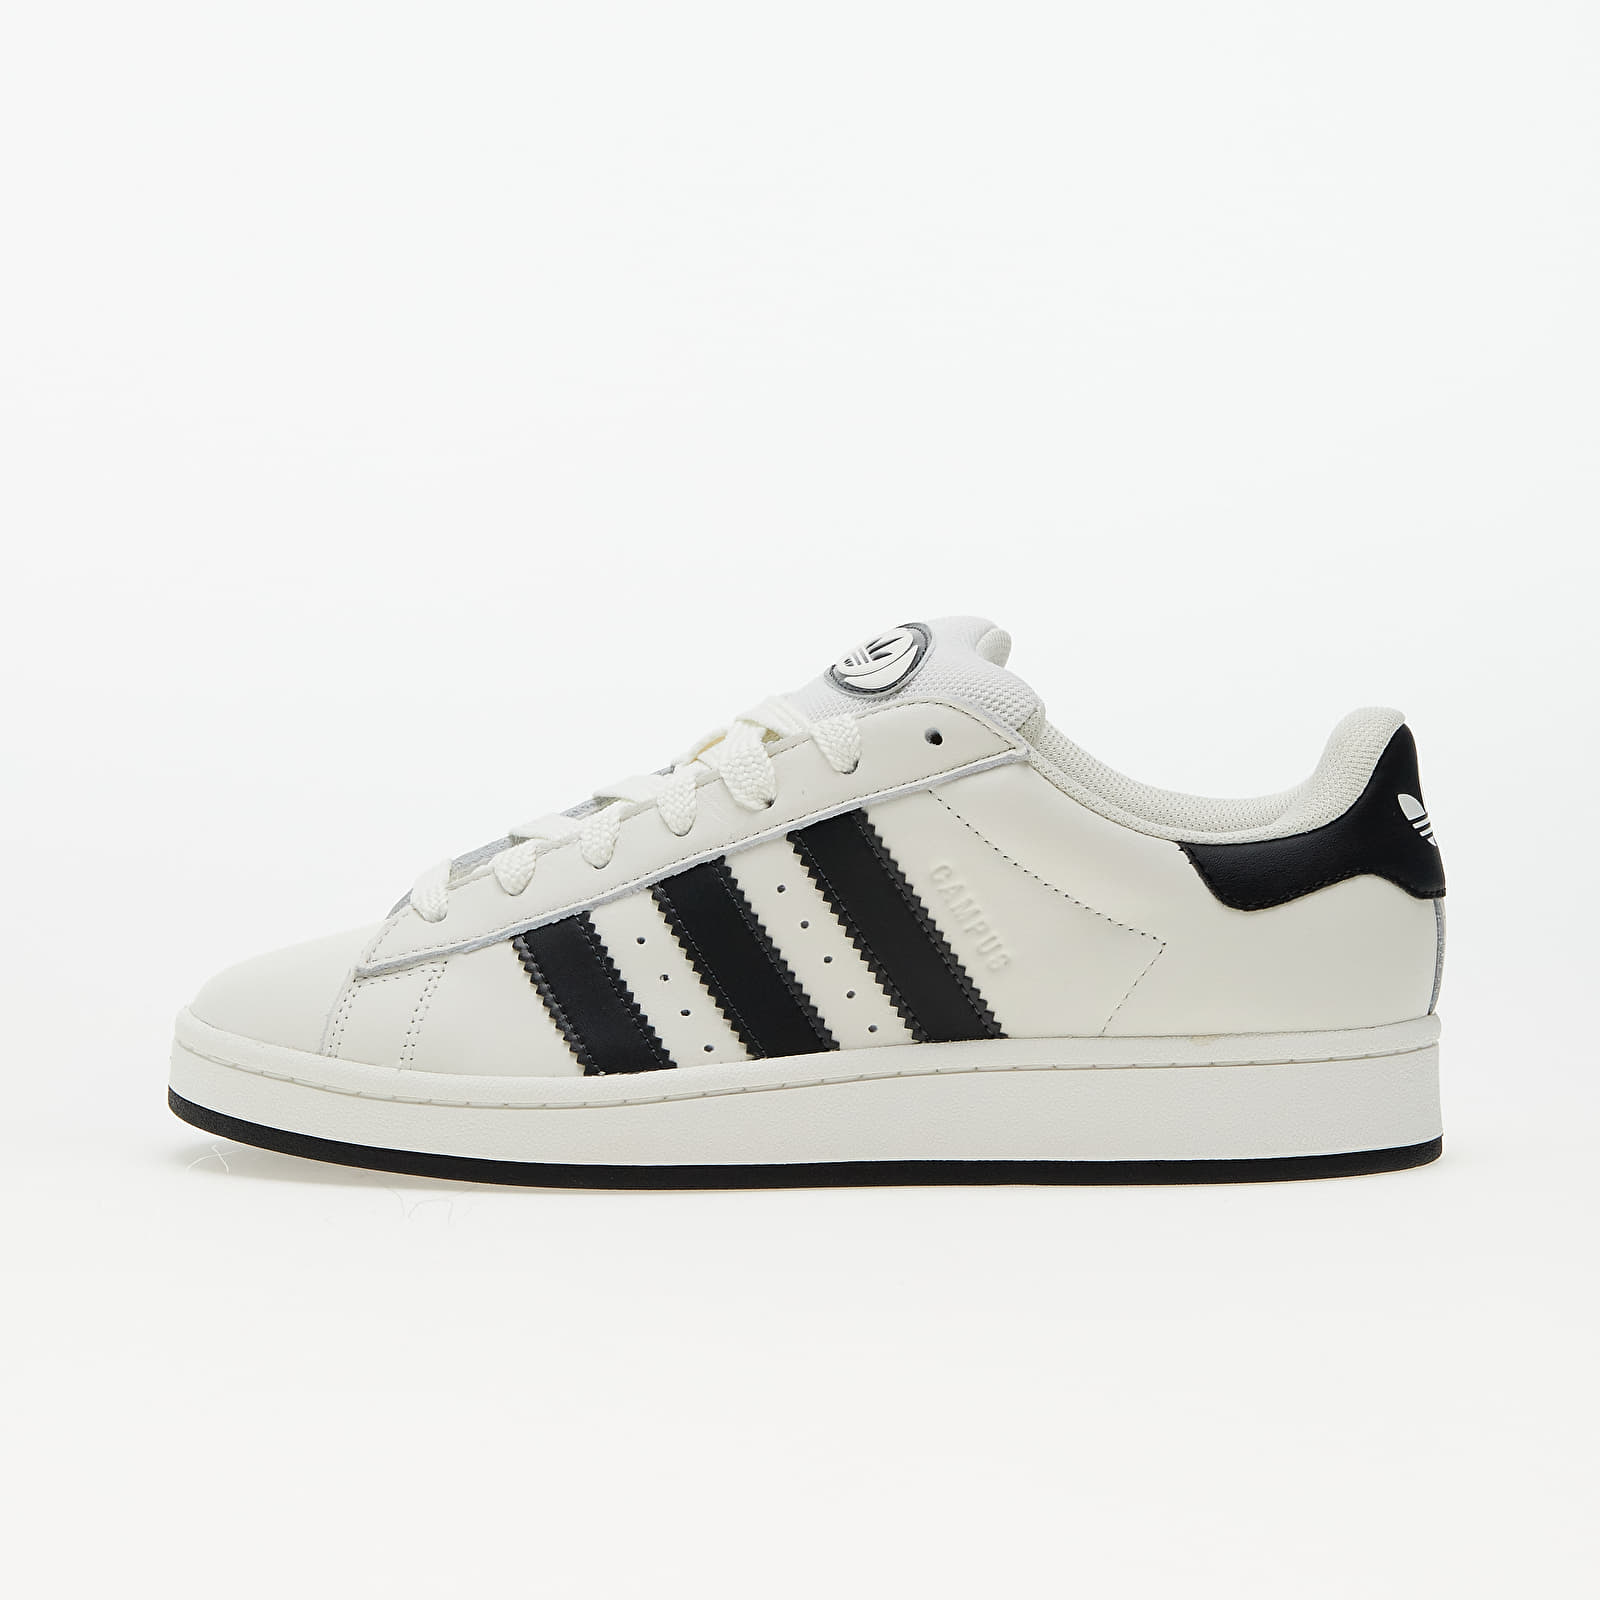 Men's sneakers and shoes adidas Campus 00s Core White/ Core Black/ Off White